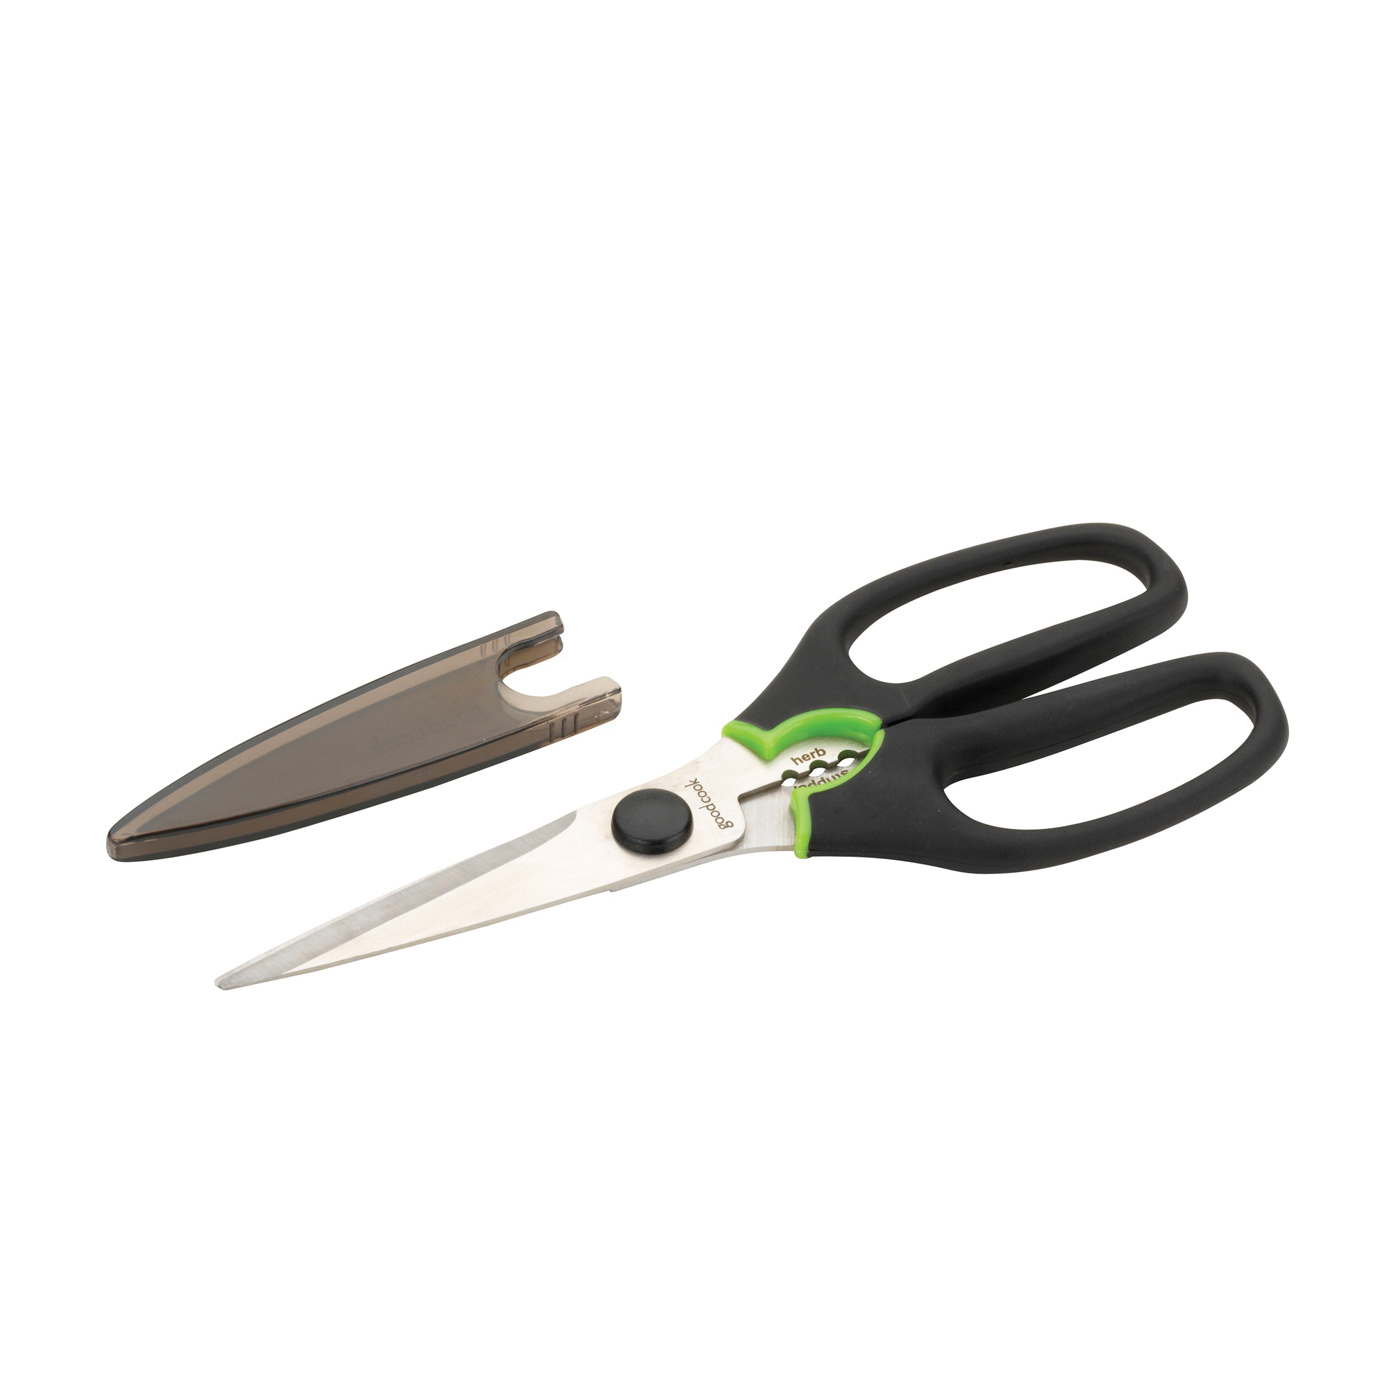 20446 Kitchen Shear with Herb Stripper, Stainless Steel Blade